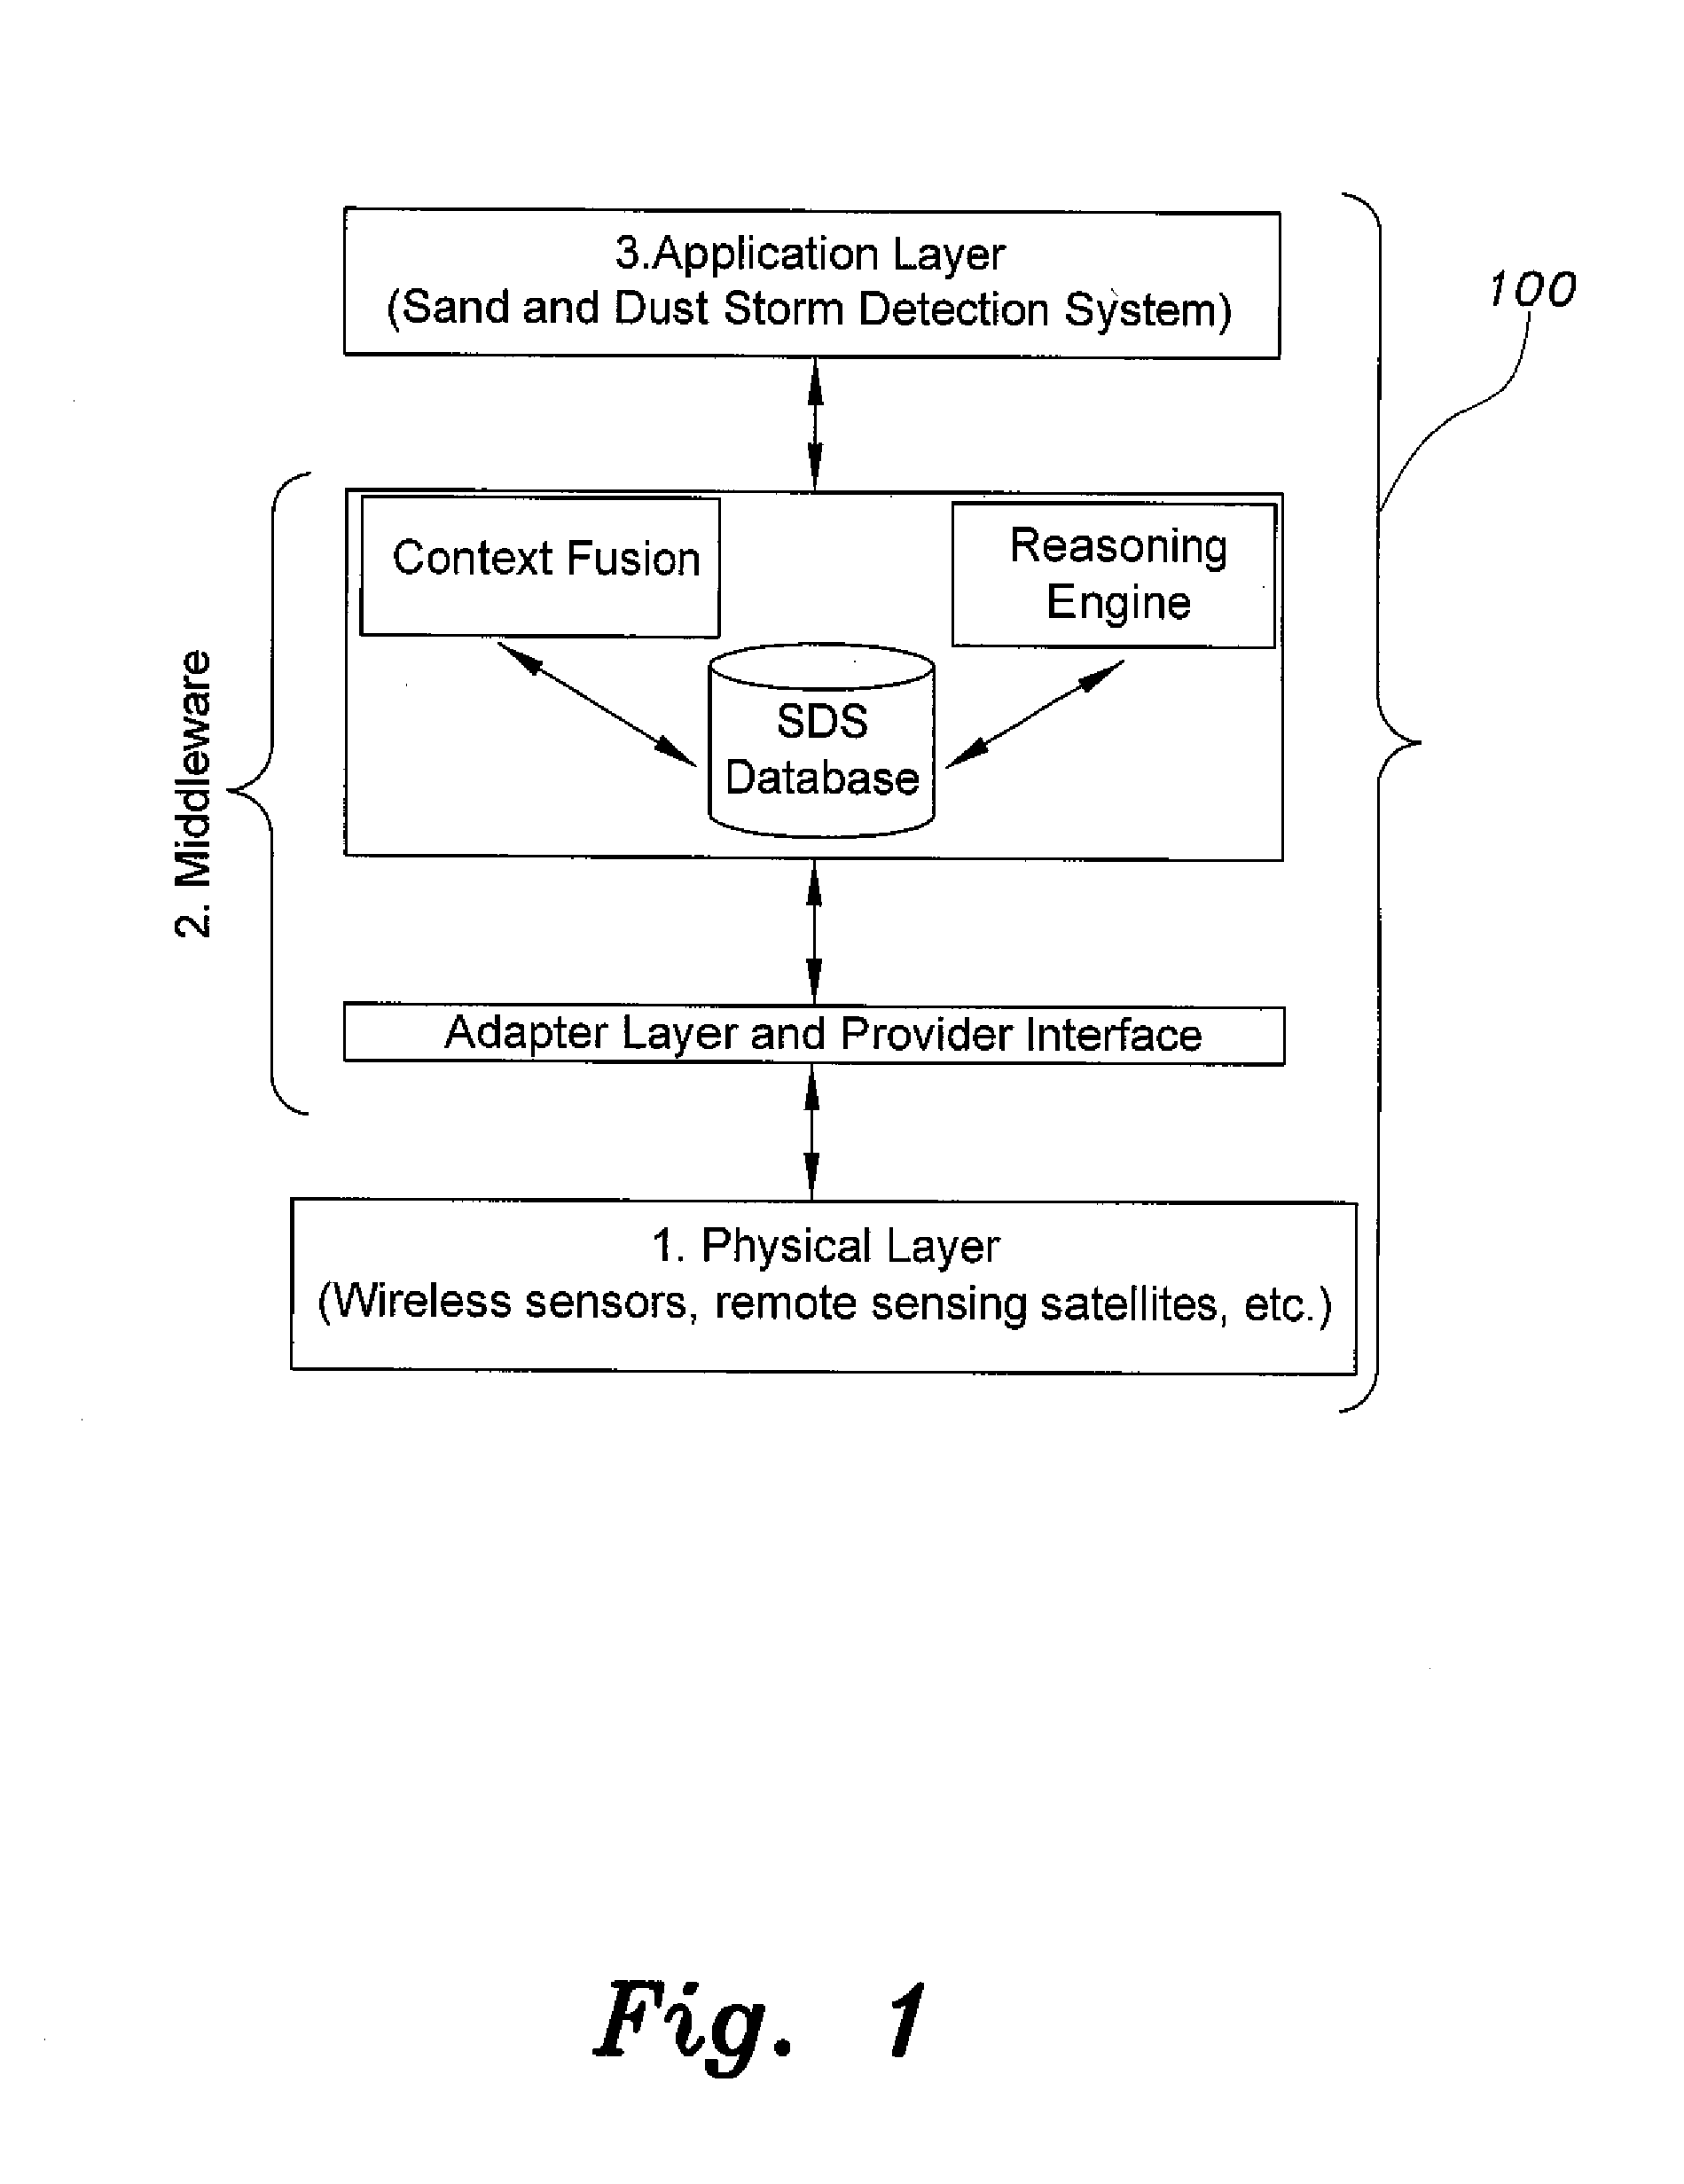 Sand and dust storm detection method